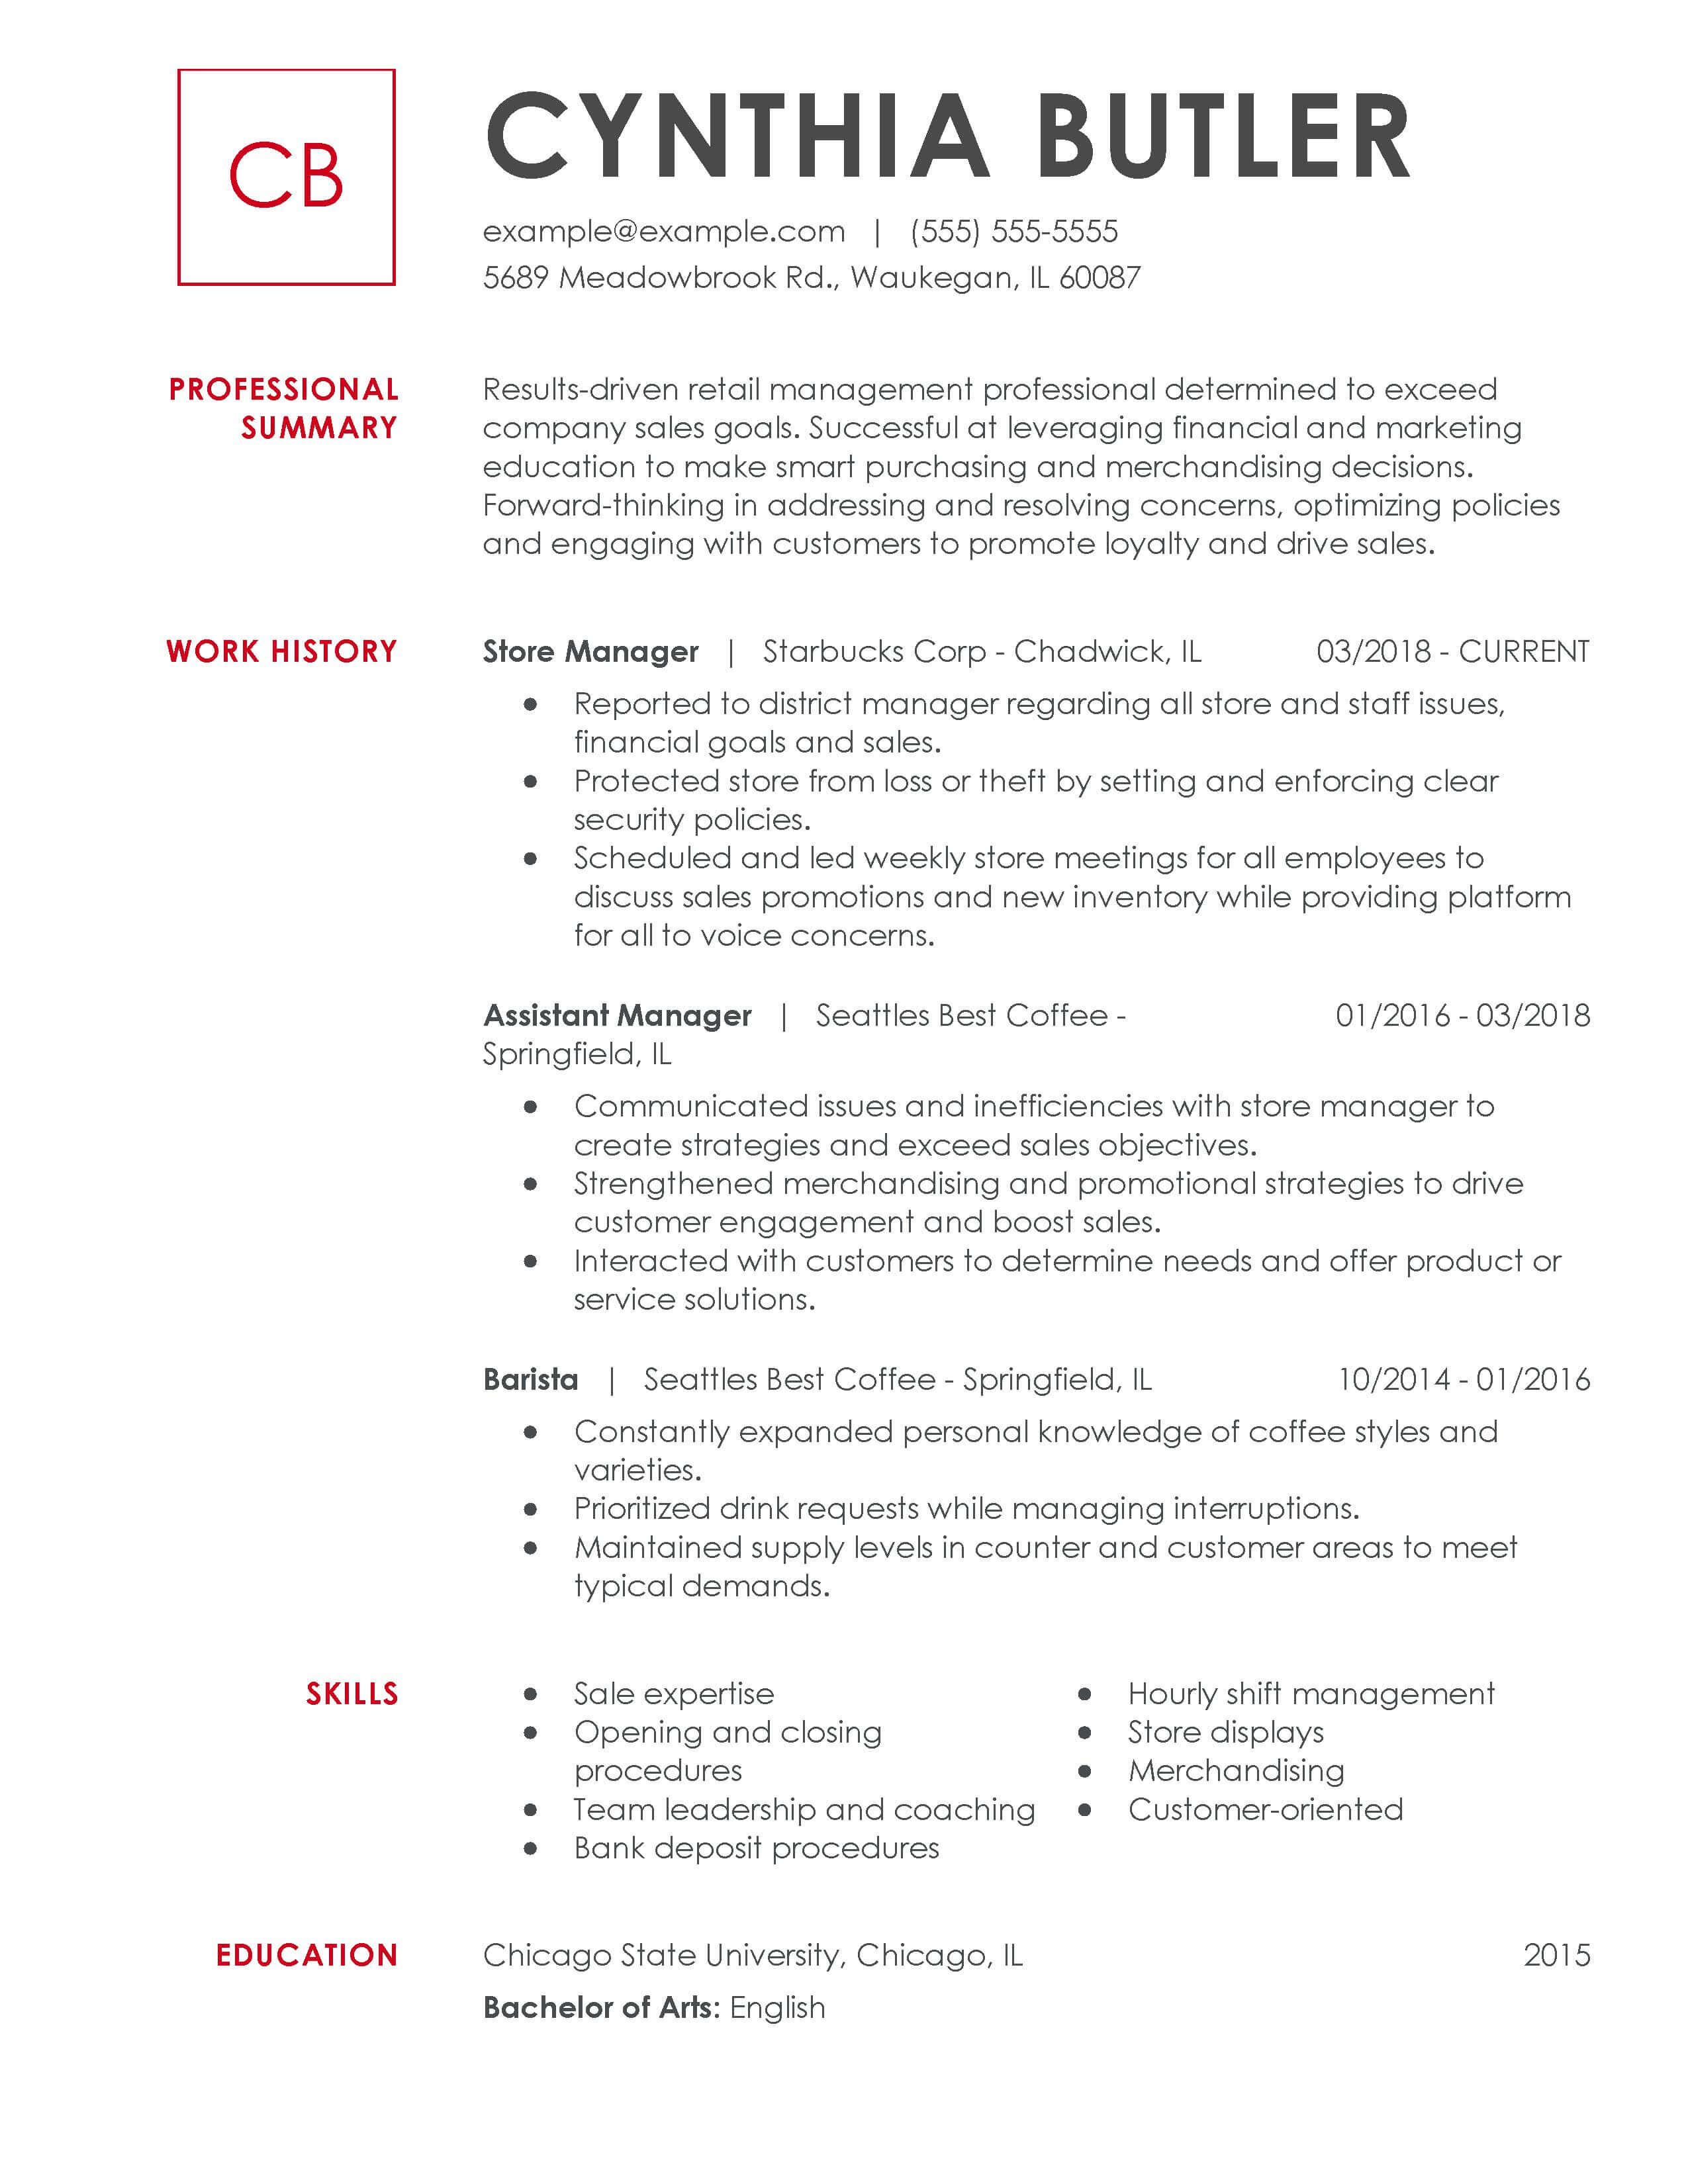 Example Of A Resume Bc Chronological Storemanager example of a resume|wikiresume.com